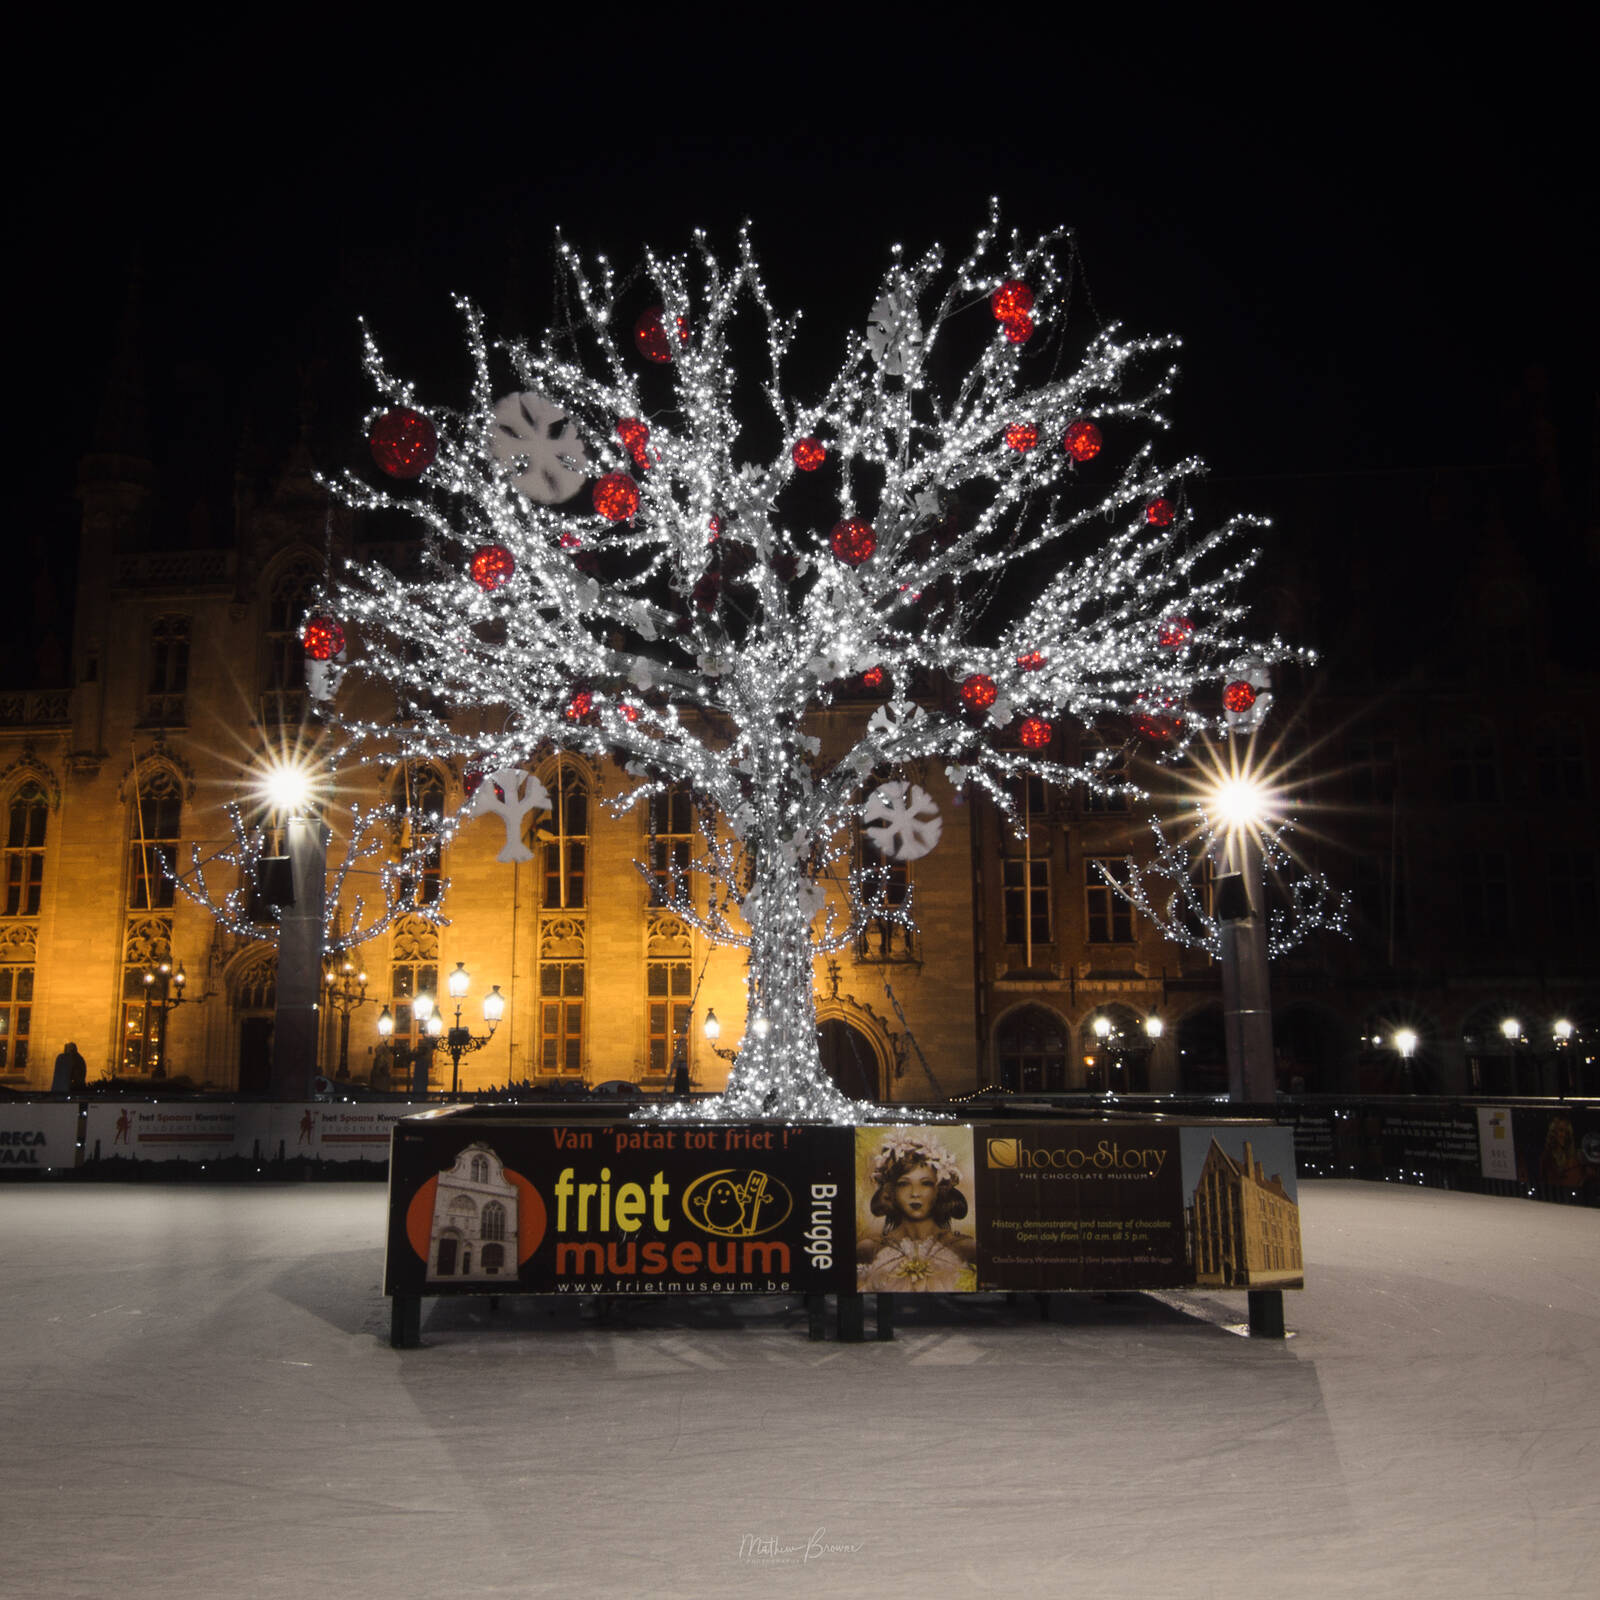 Image of Bruges Christmas Markets by Mathew Browne